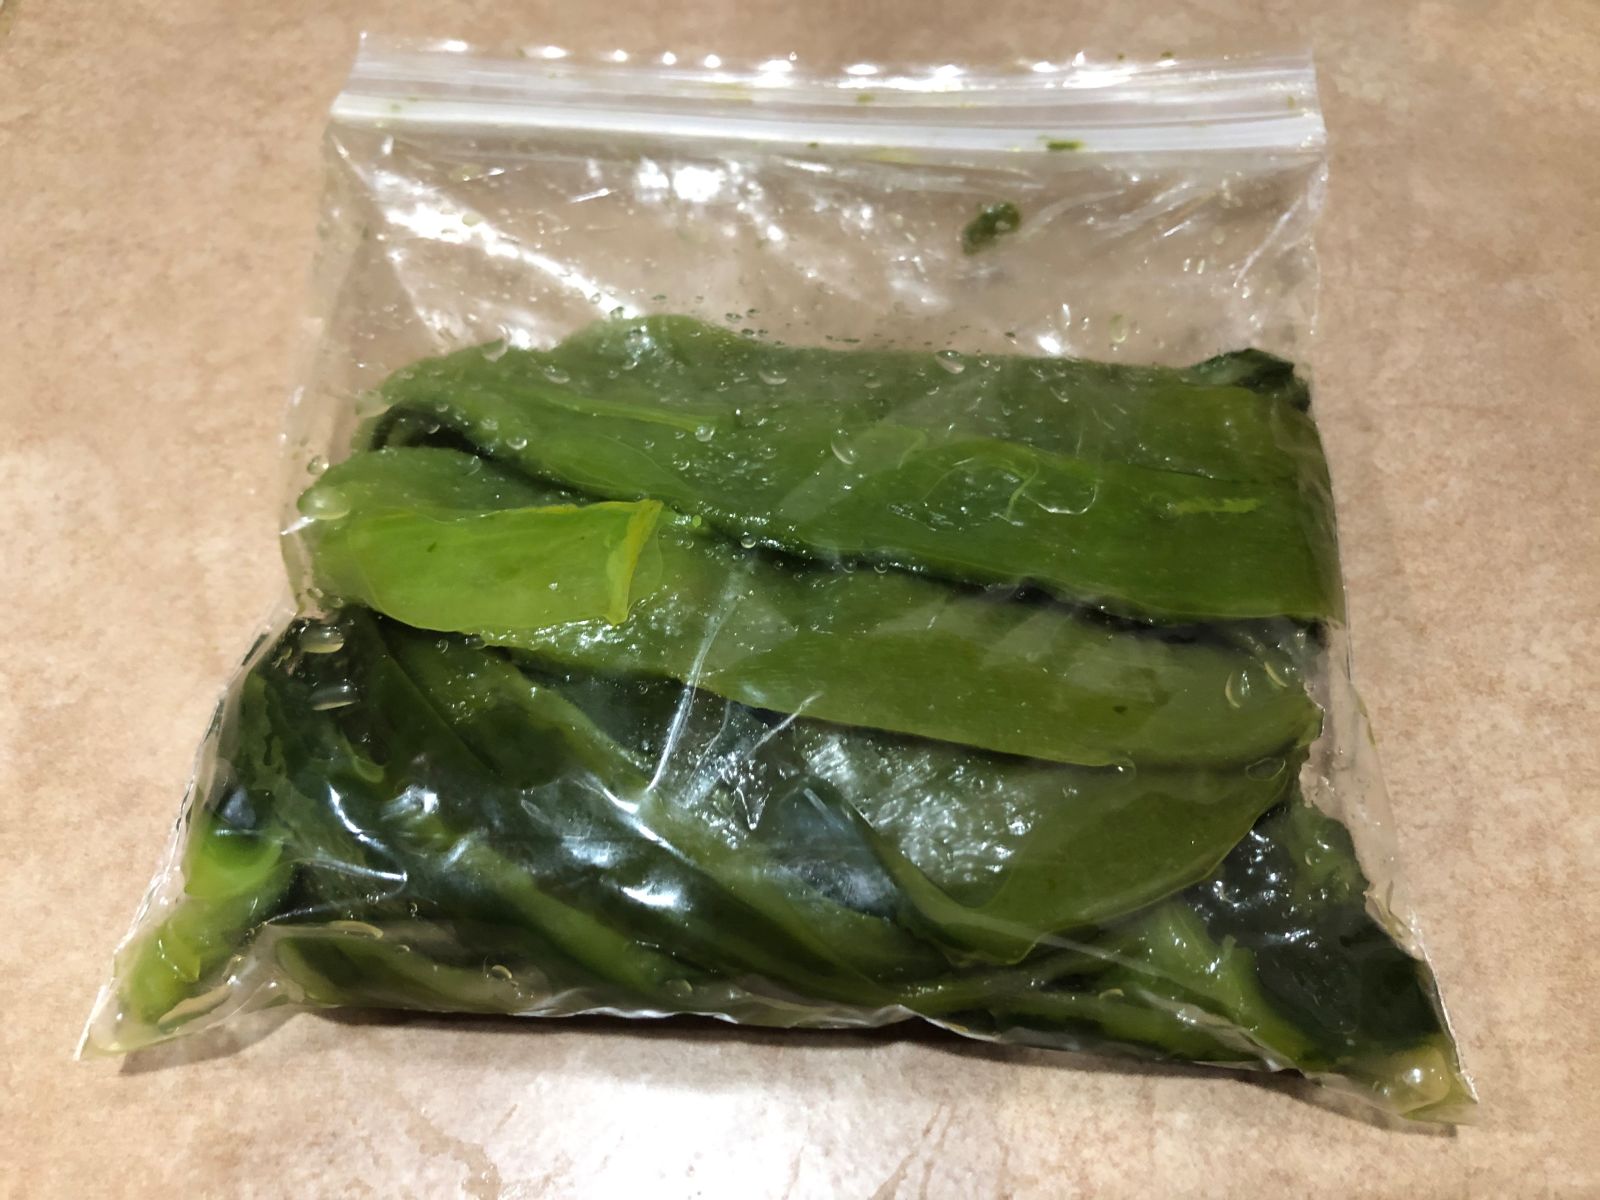 Poblanos. The three in here are the spiciest I’ve ever seen up here in WA. Like approaching jalapeño levels of heat. Pretty weird/crazy. They roasted really nicely, too. Skins came off really easily and they didn’t turn to mush like I’ve seen with a lot of them I get here.